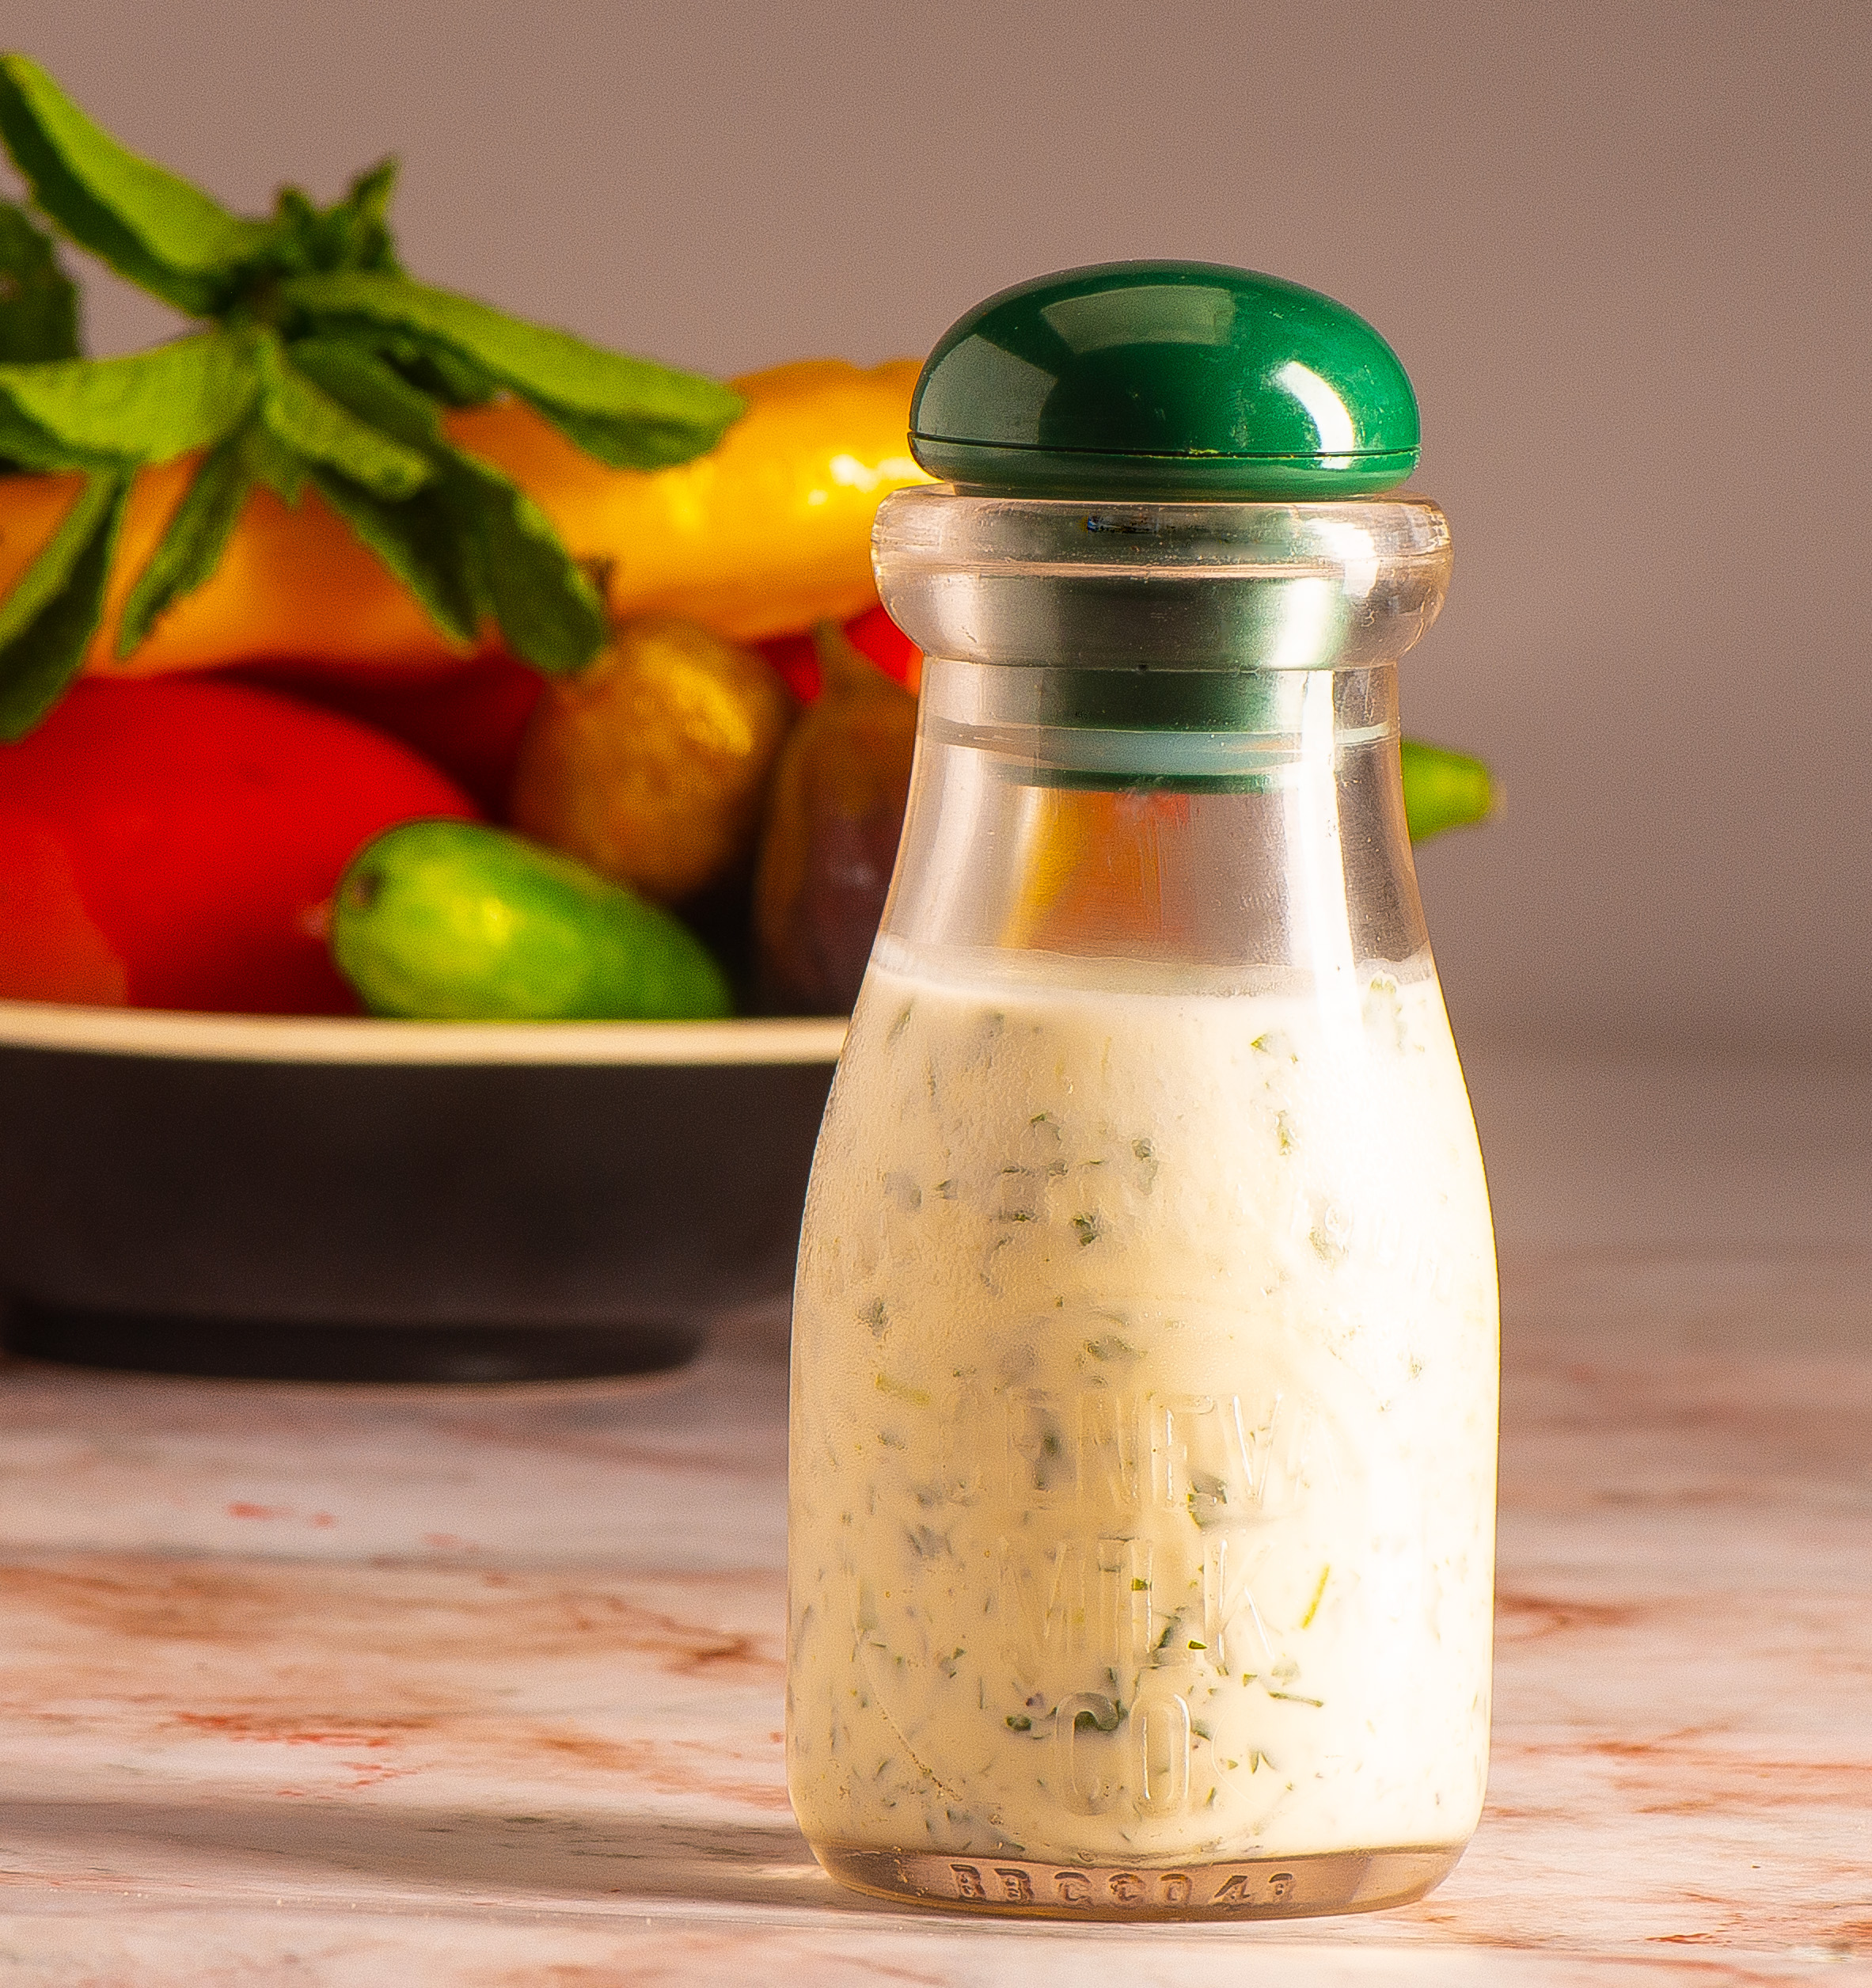 A Guilty Pleasure: Homemade Ranch Dressing